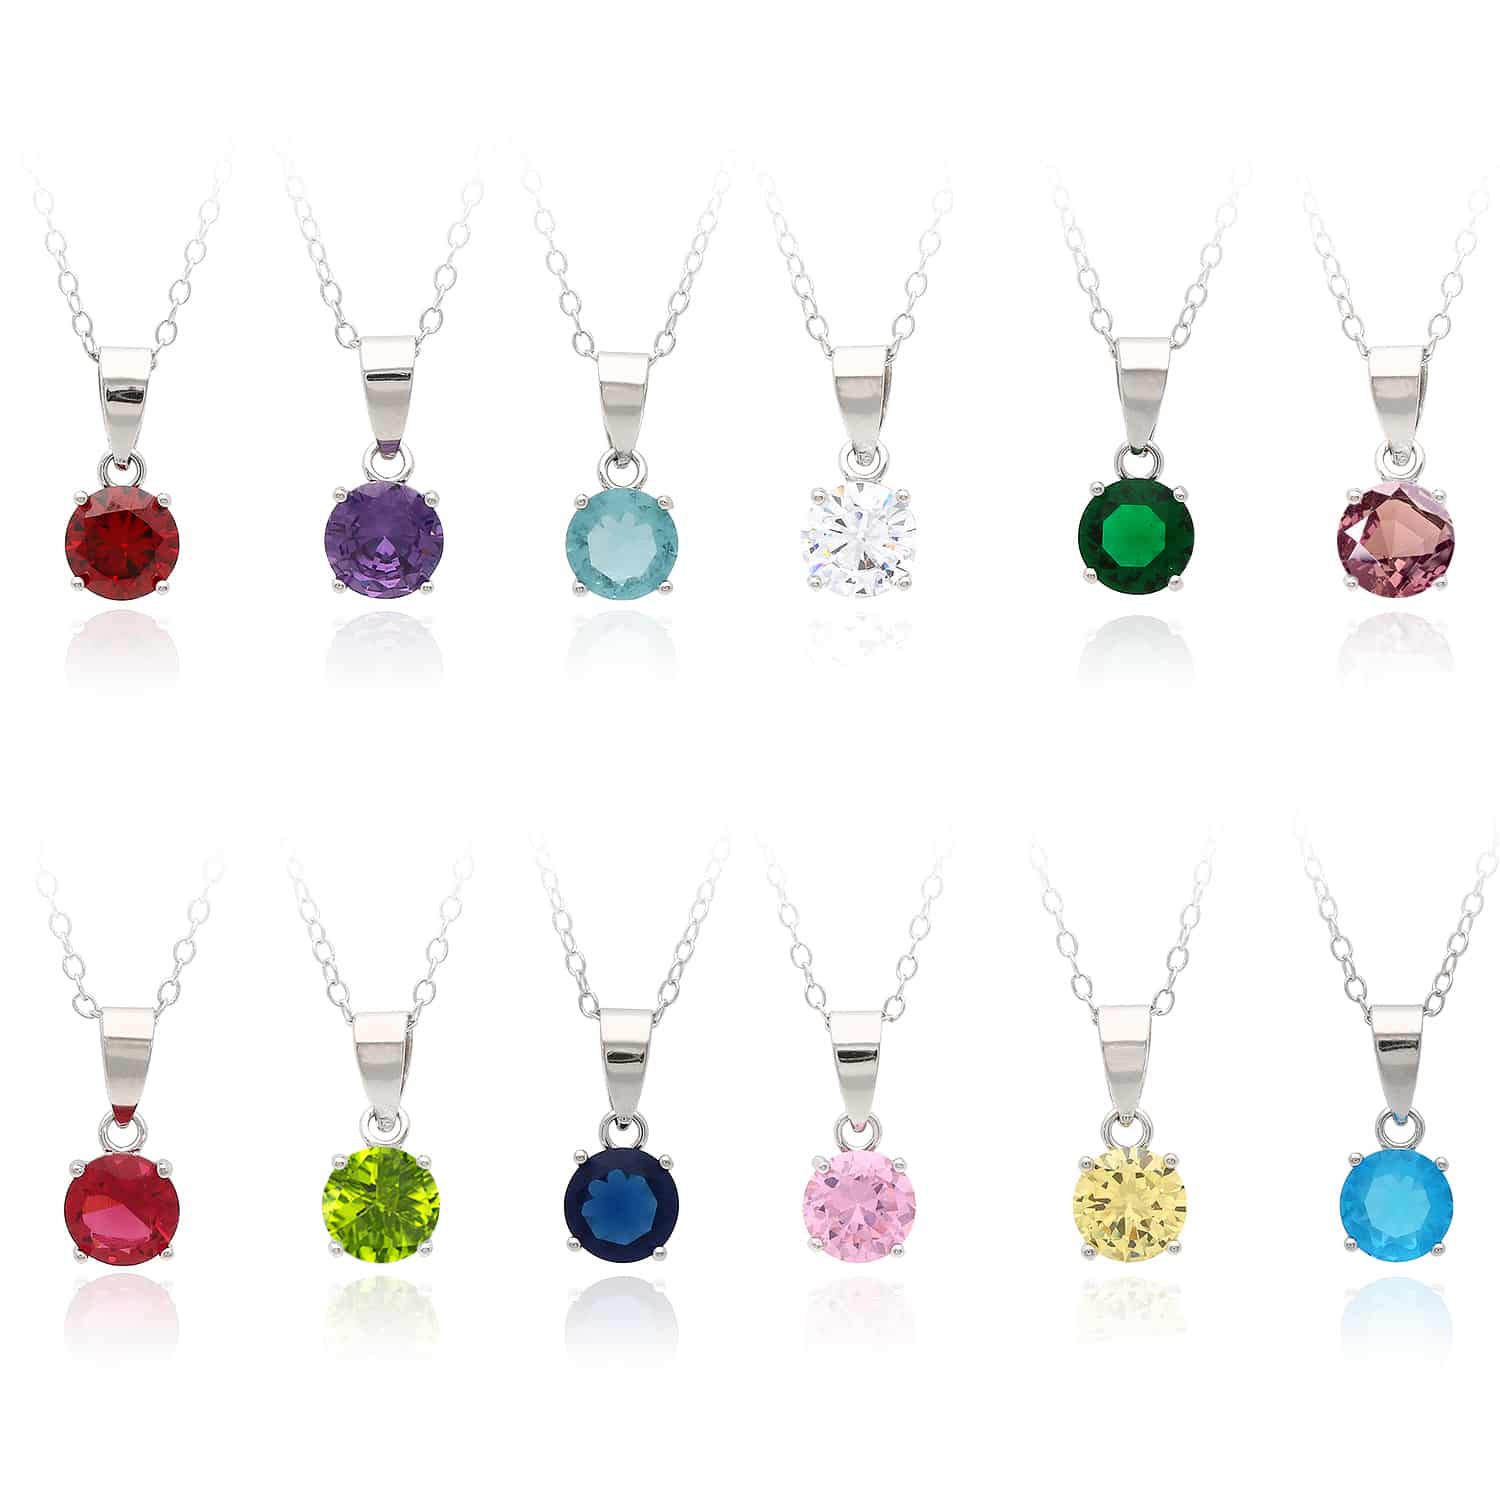 Sterling Silver Round-Cut Solitaire Birthstone Pendant Chain Necklace 16-18" Adj - February - Amethyst